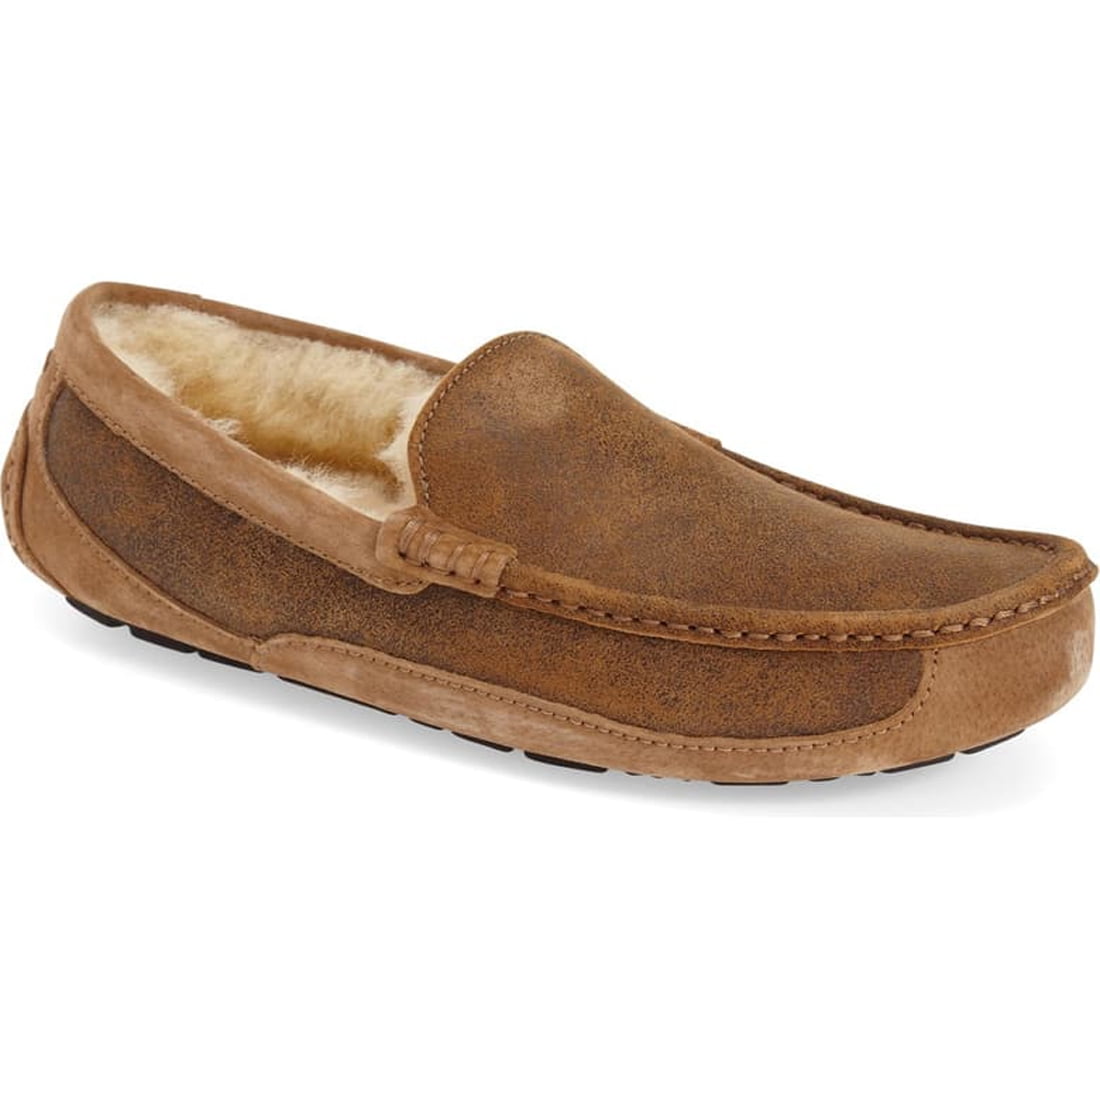 ugg mens slippers cyber monday